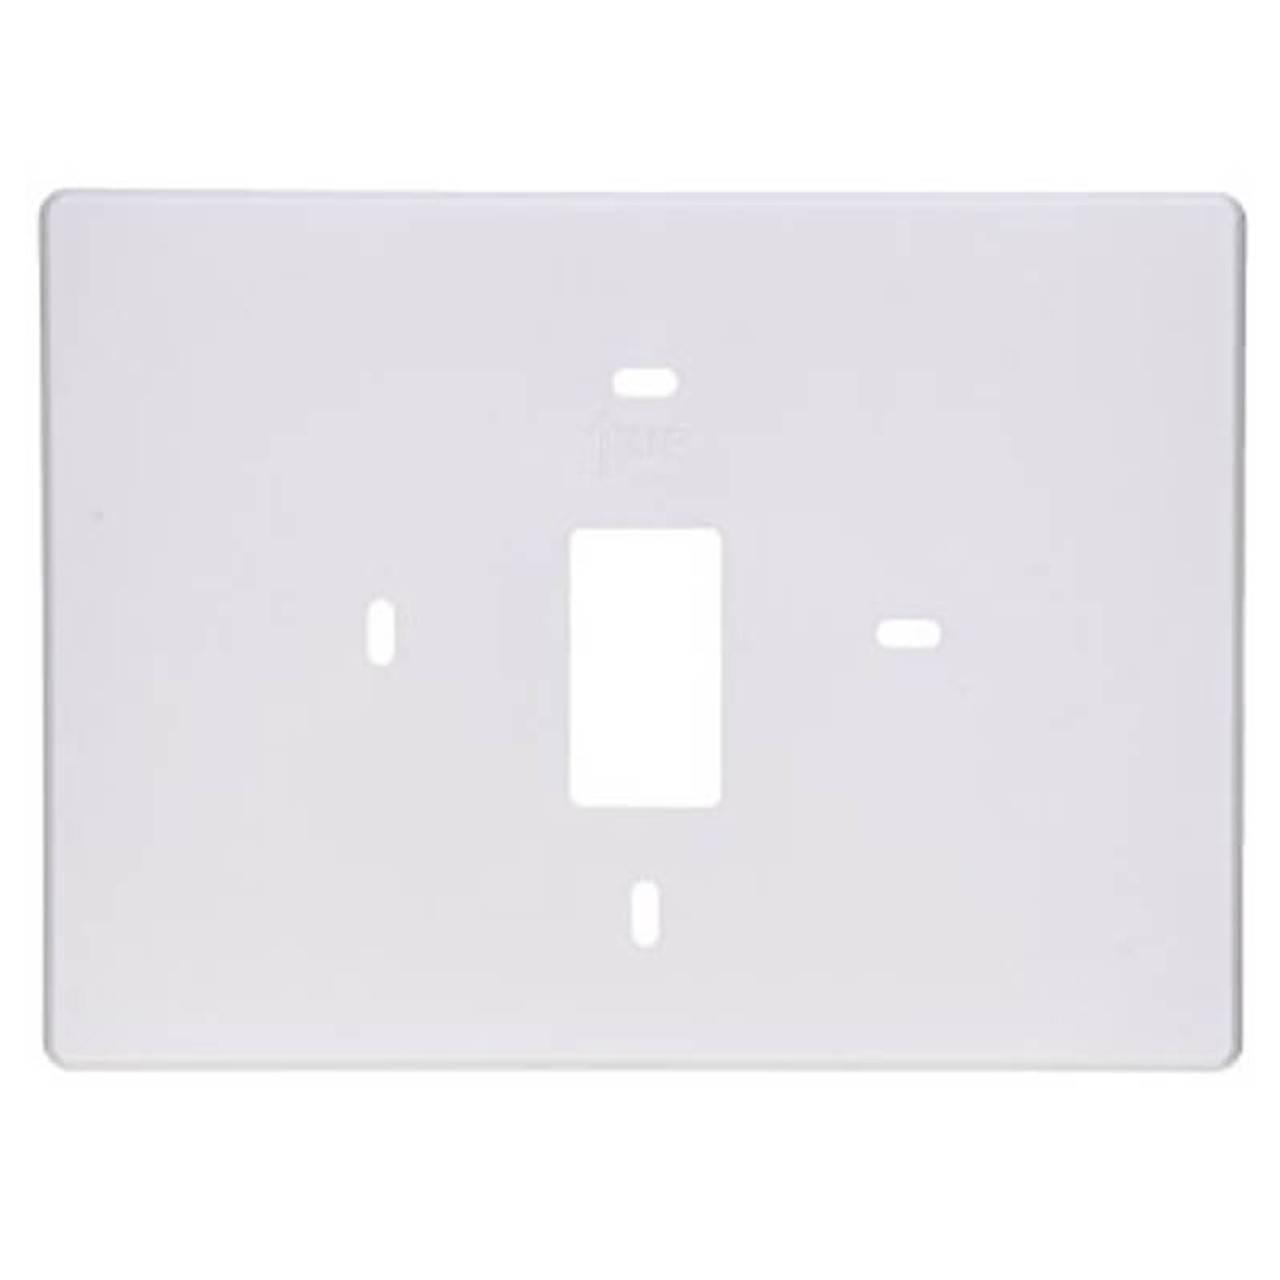 Pro1 IAQ T119 Thermostat Wall Plate - White